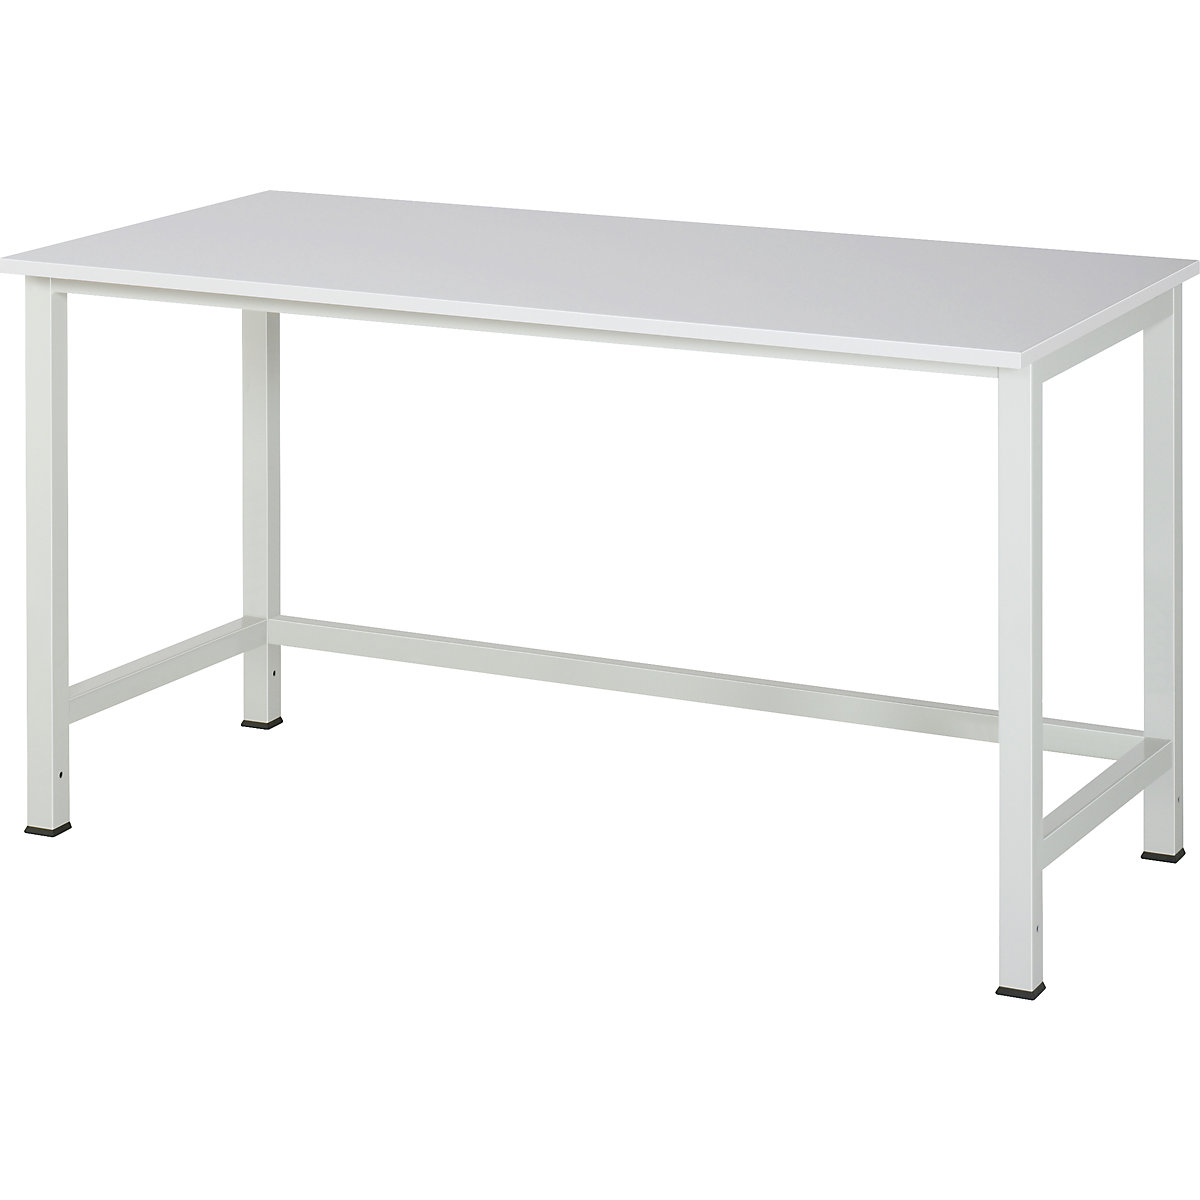 Work table for Series 900 workplace system – RAU, melamine coated, width 1500 mm-3